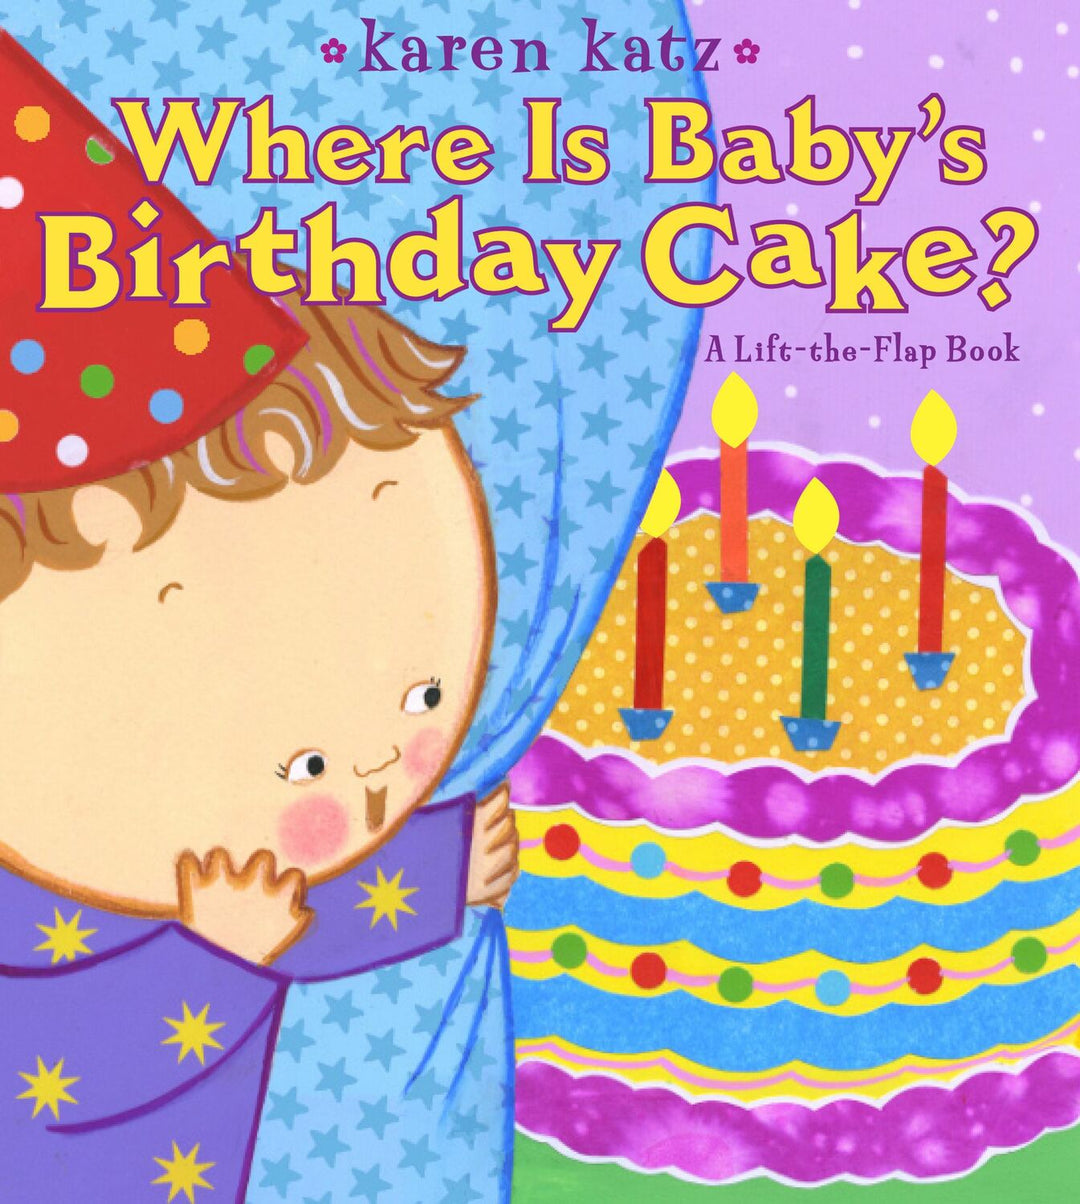 Where Is Baby's Birthday Cake?: A Lift-the-Flap Book